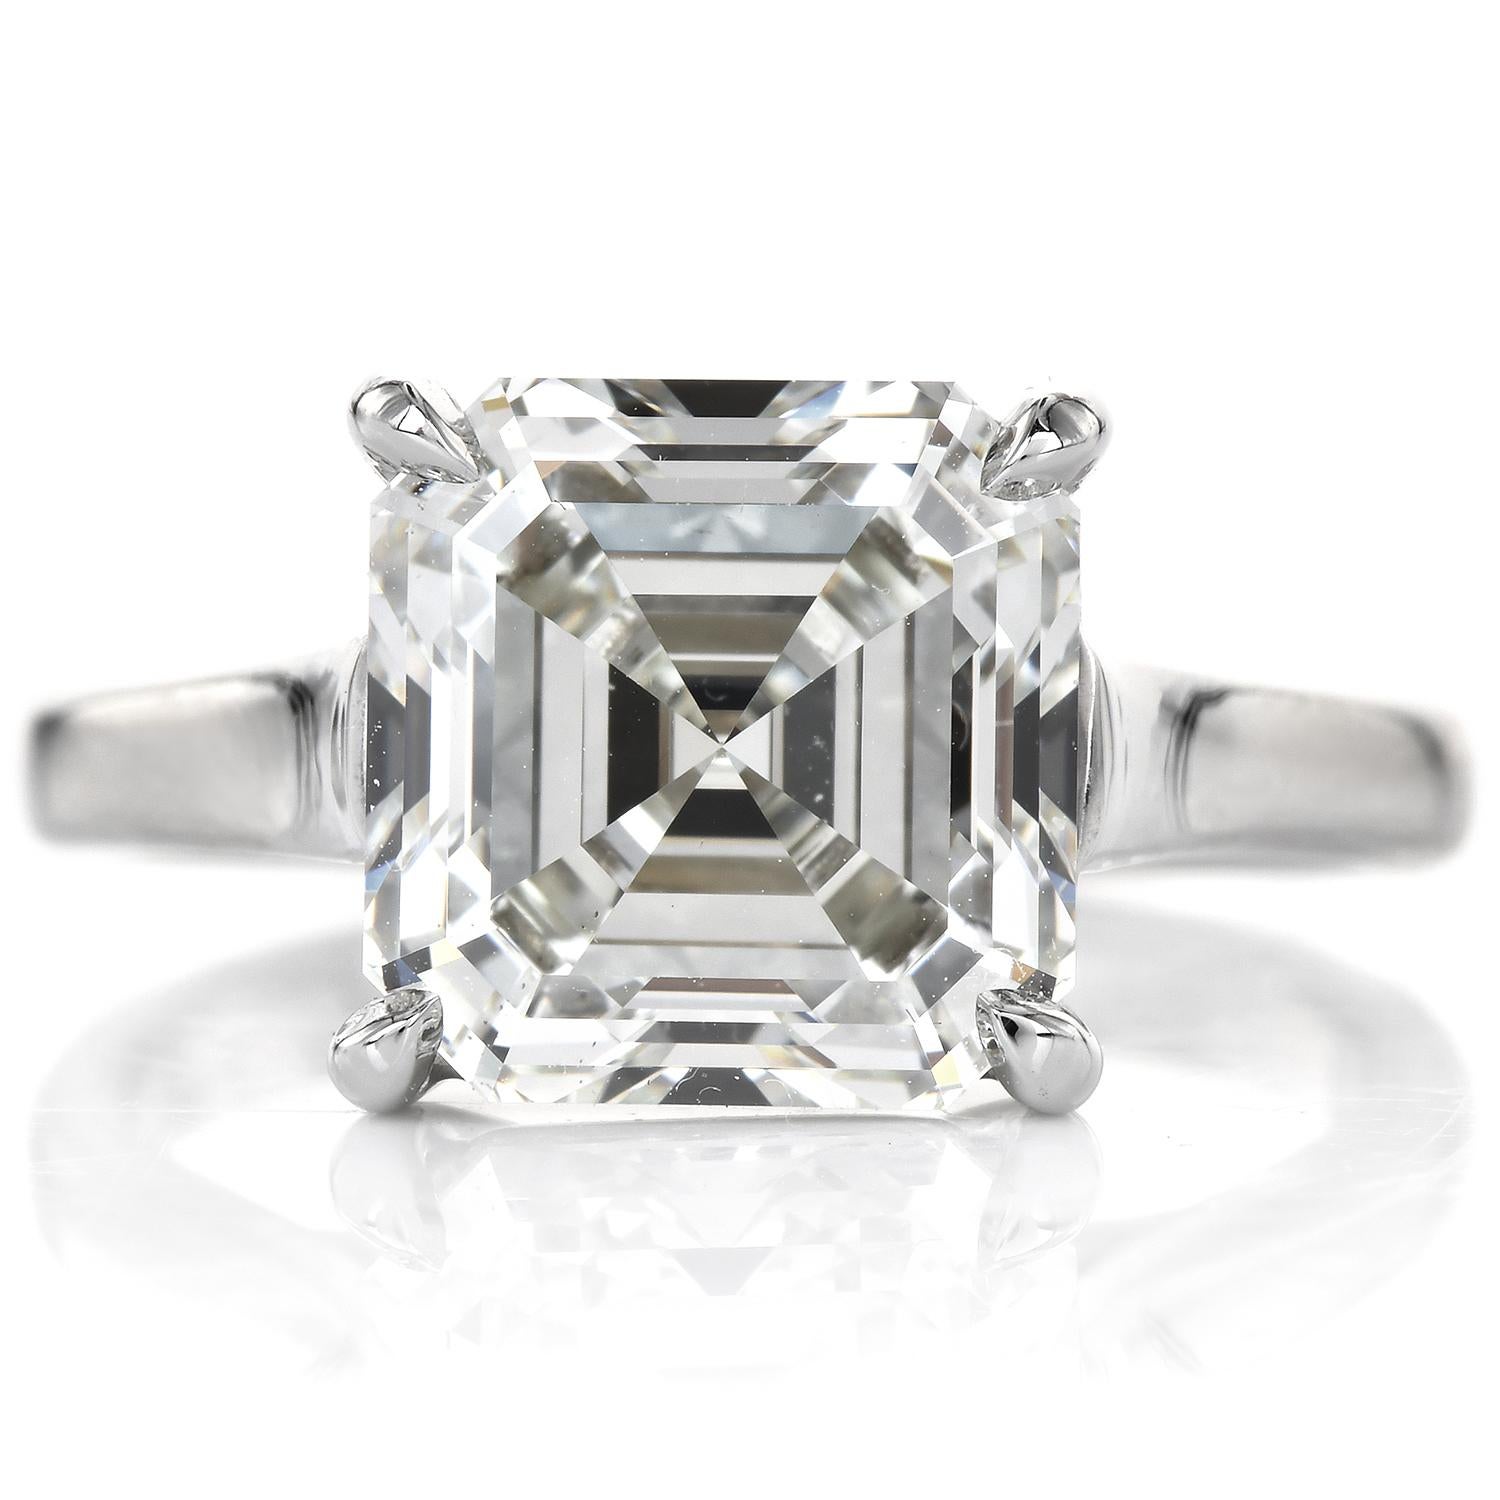 This Breathtaking Square Emerald-cut diamond ring is crafted in solid 14k white gold. It is Centered on a natural diamond, weighing approx 5.49 carats K-VS2 Color with Excellent proportion secured in four prongs. This conspicuous engagement ring